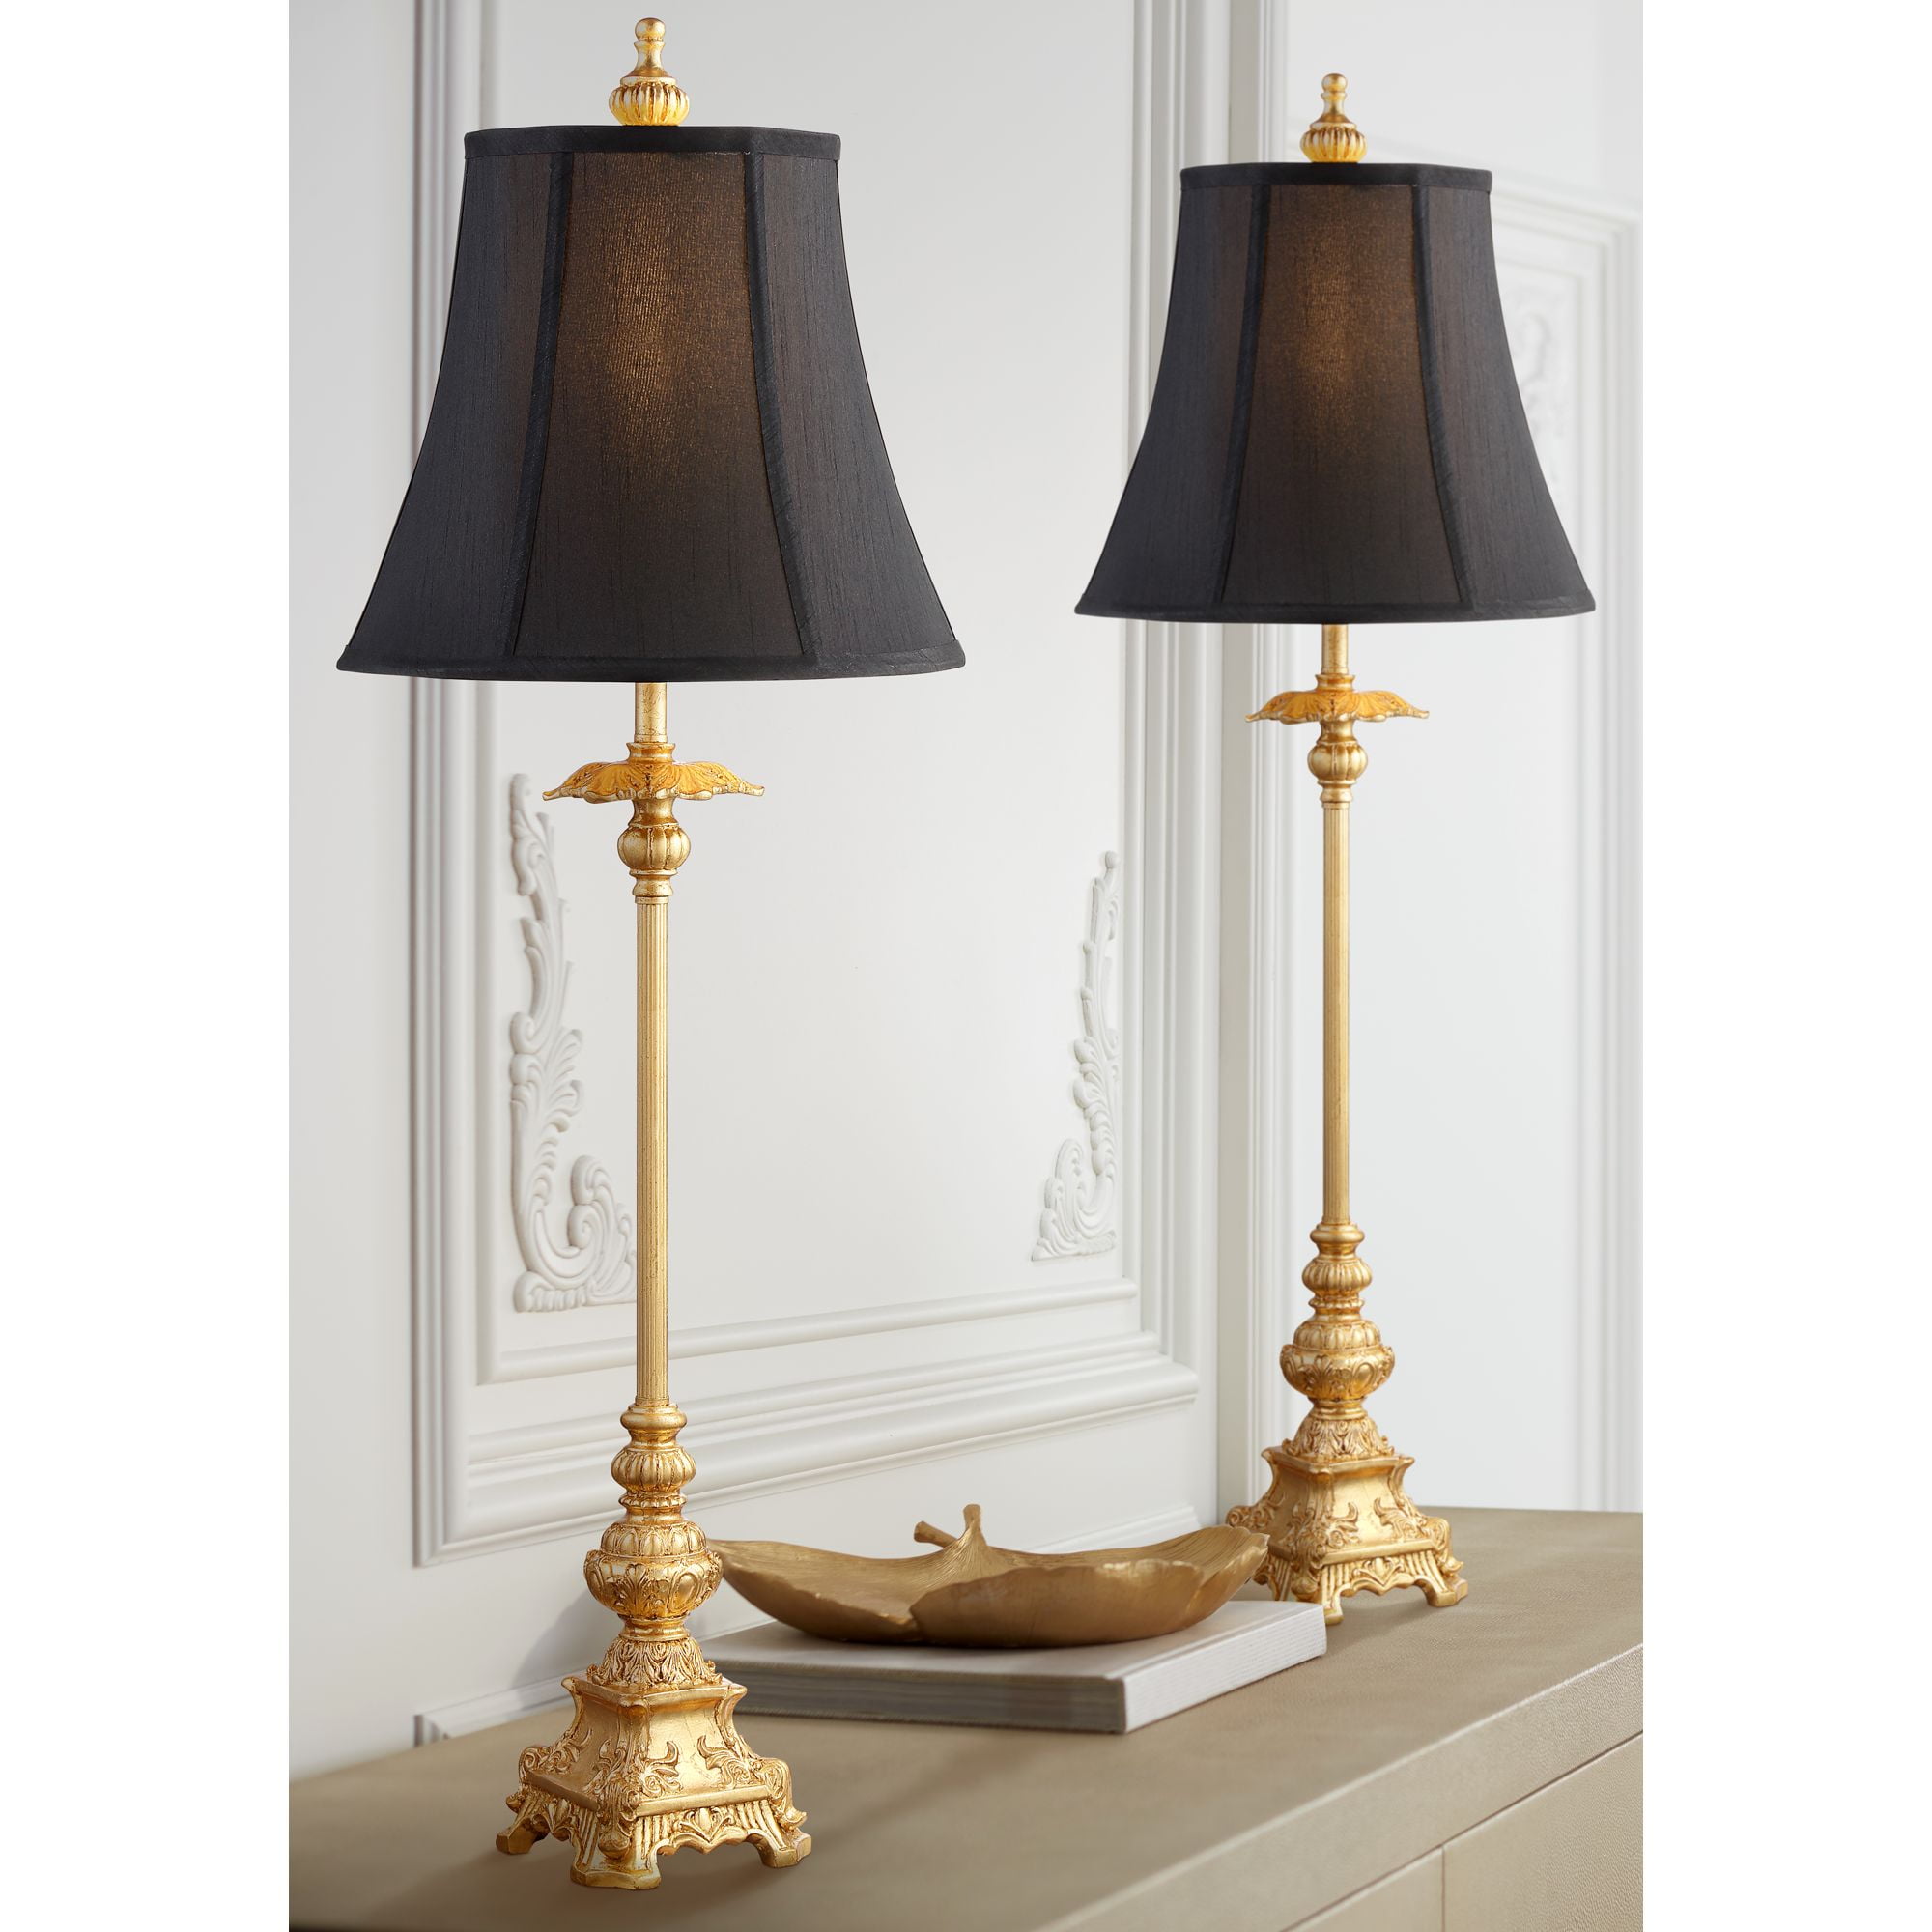 Regency Hill Traditional Buffet Table Lamps Set of 2 Gold Intricate